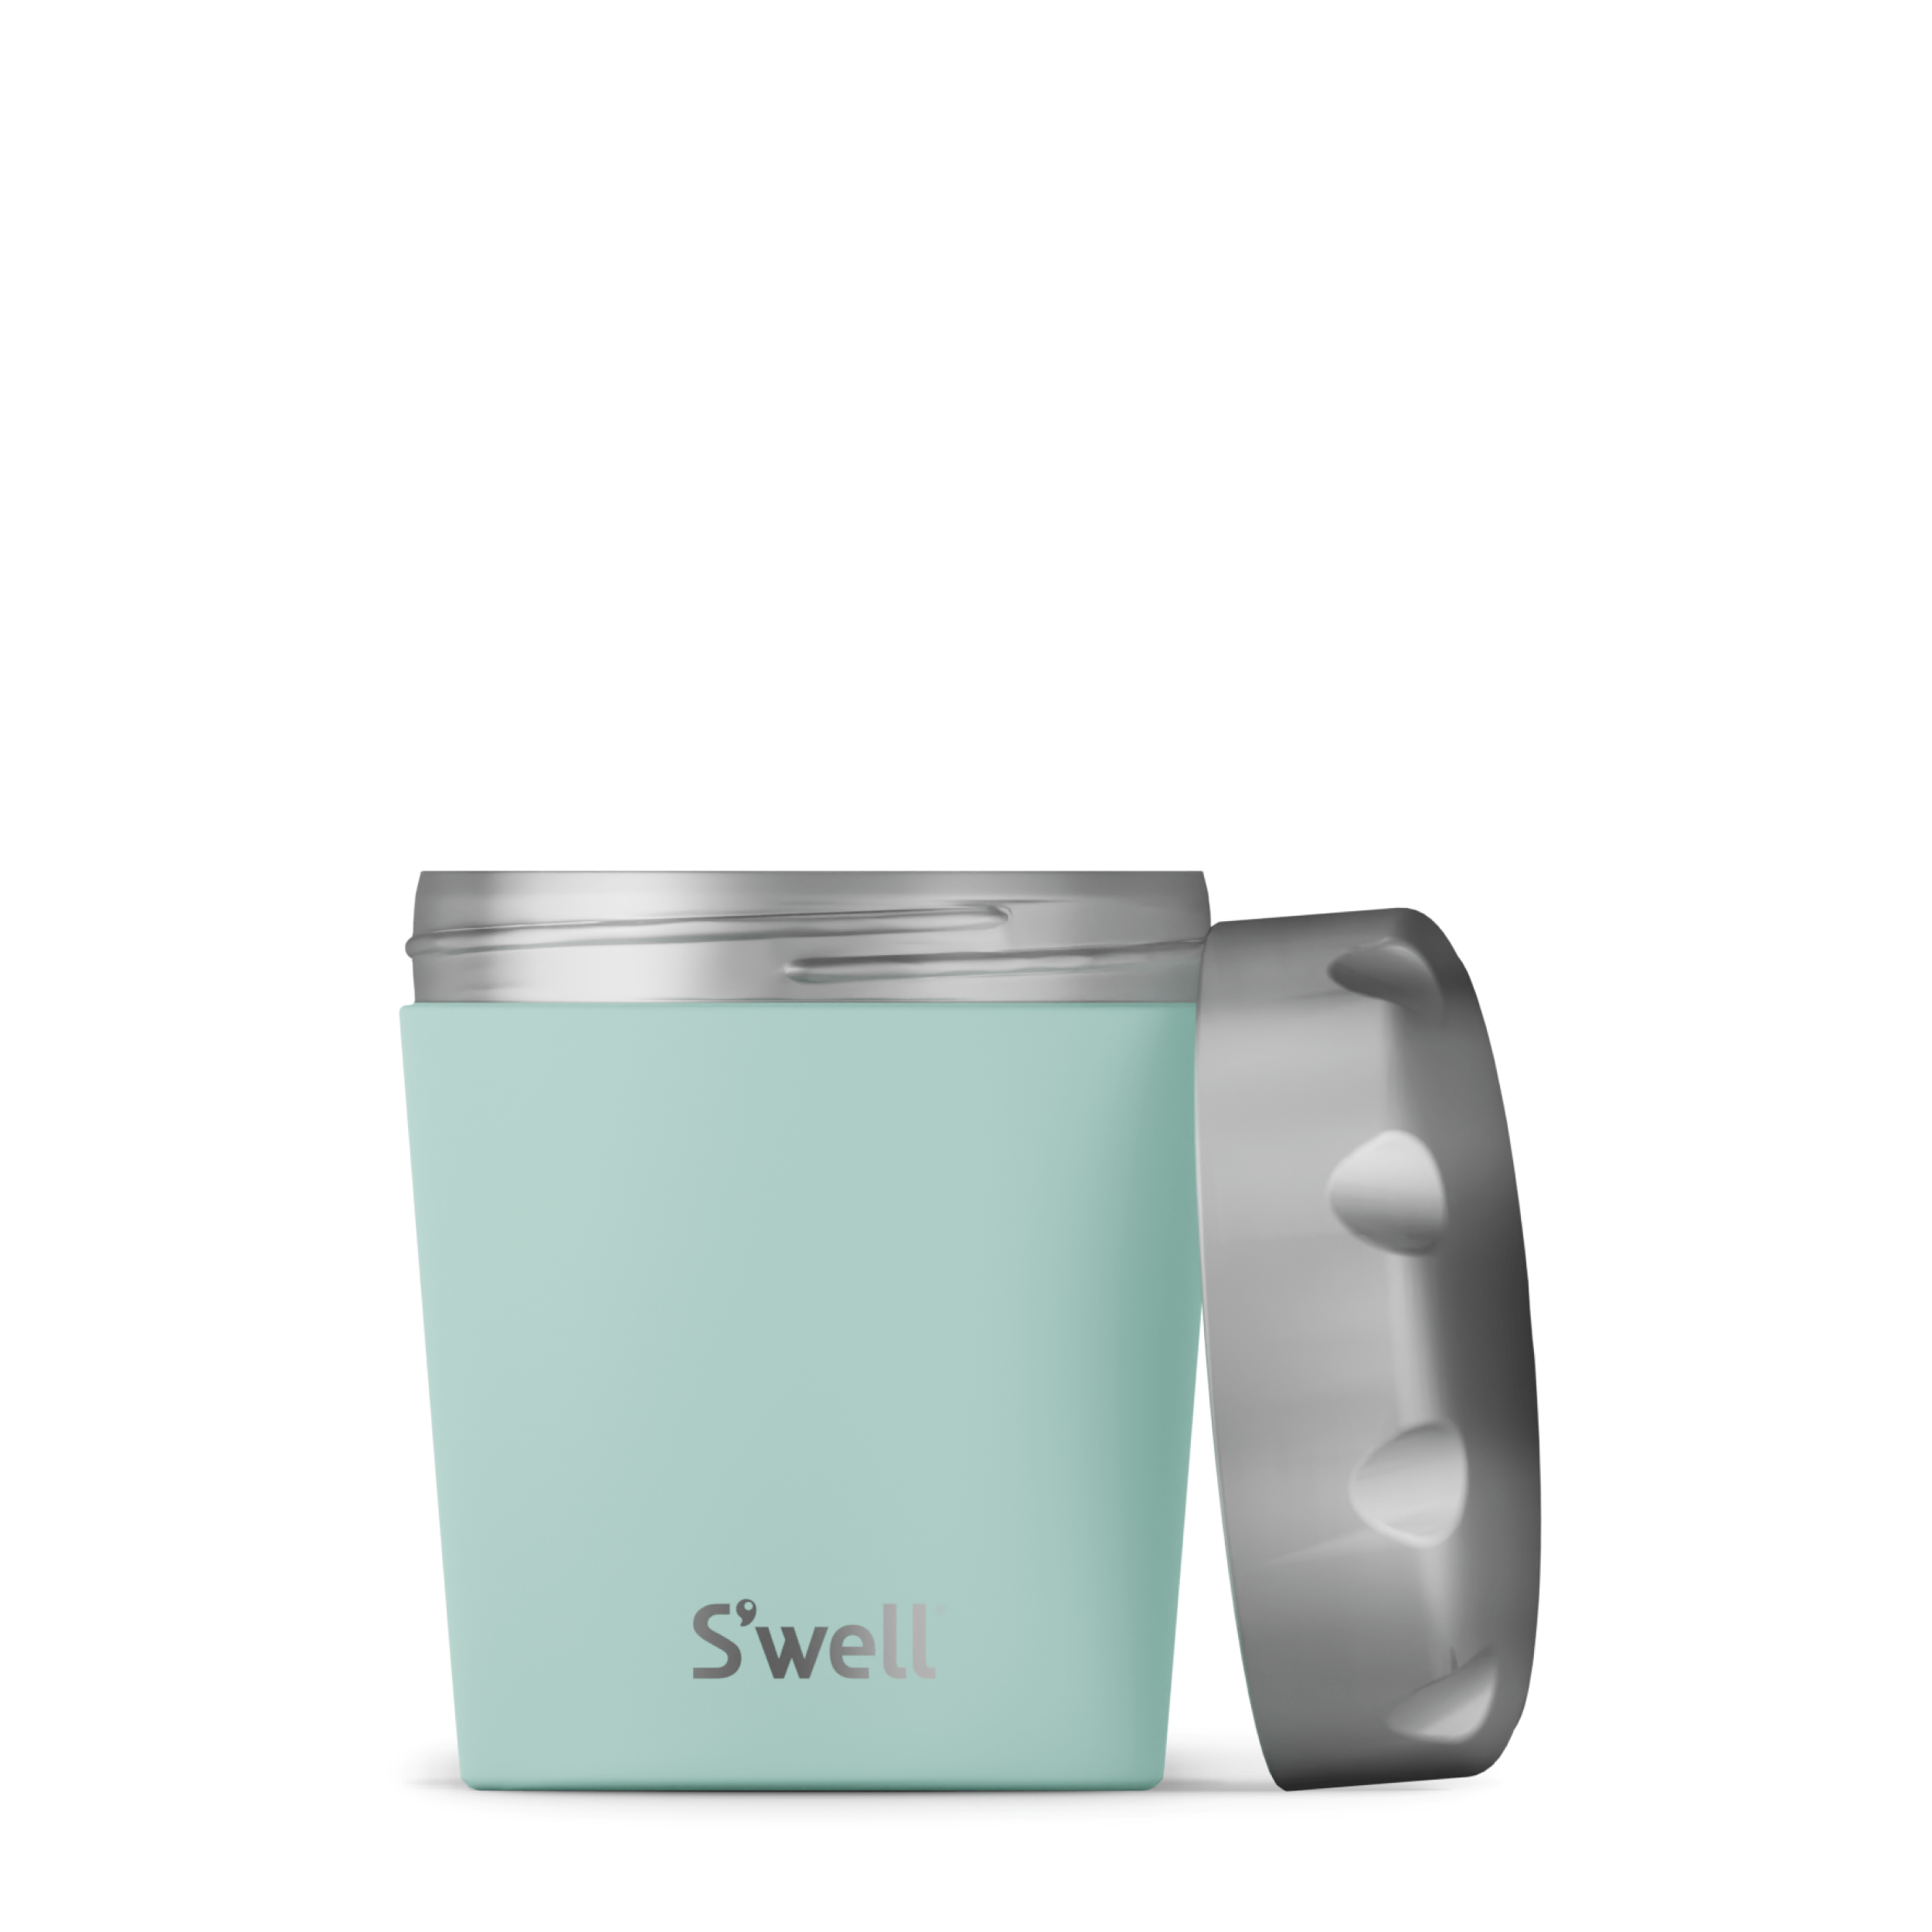 S'well swell Rose Agate Ice Cream Pint Cooler